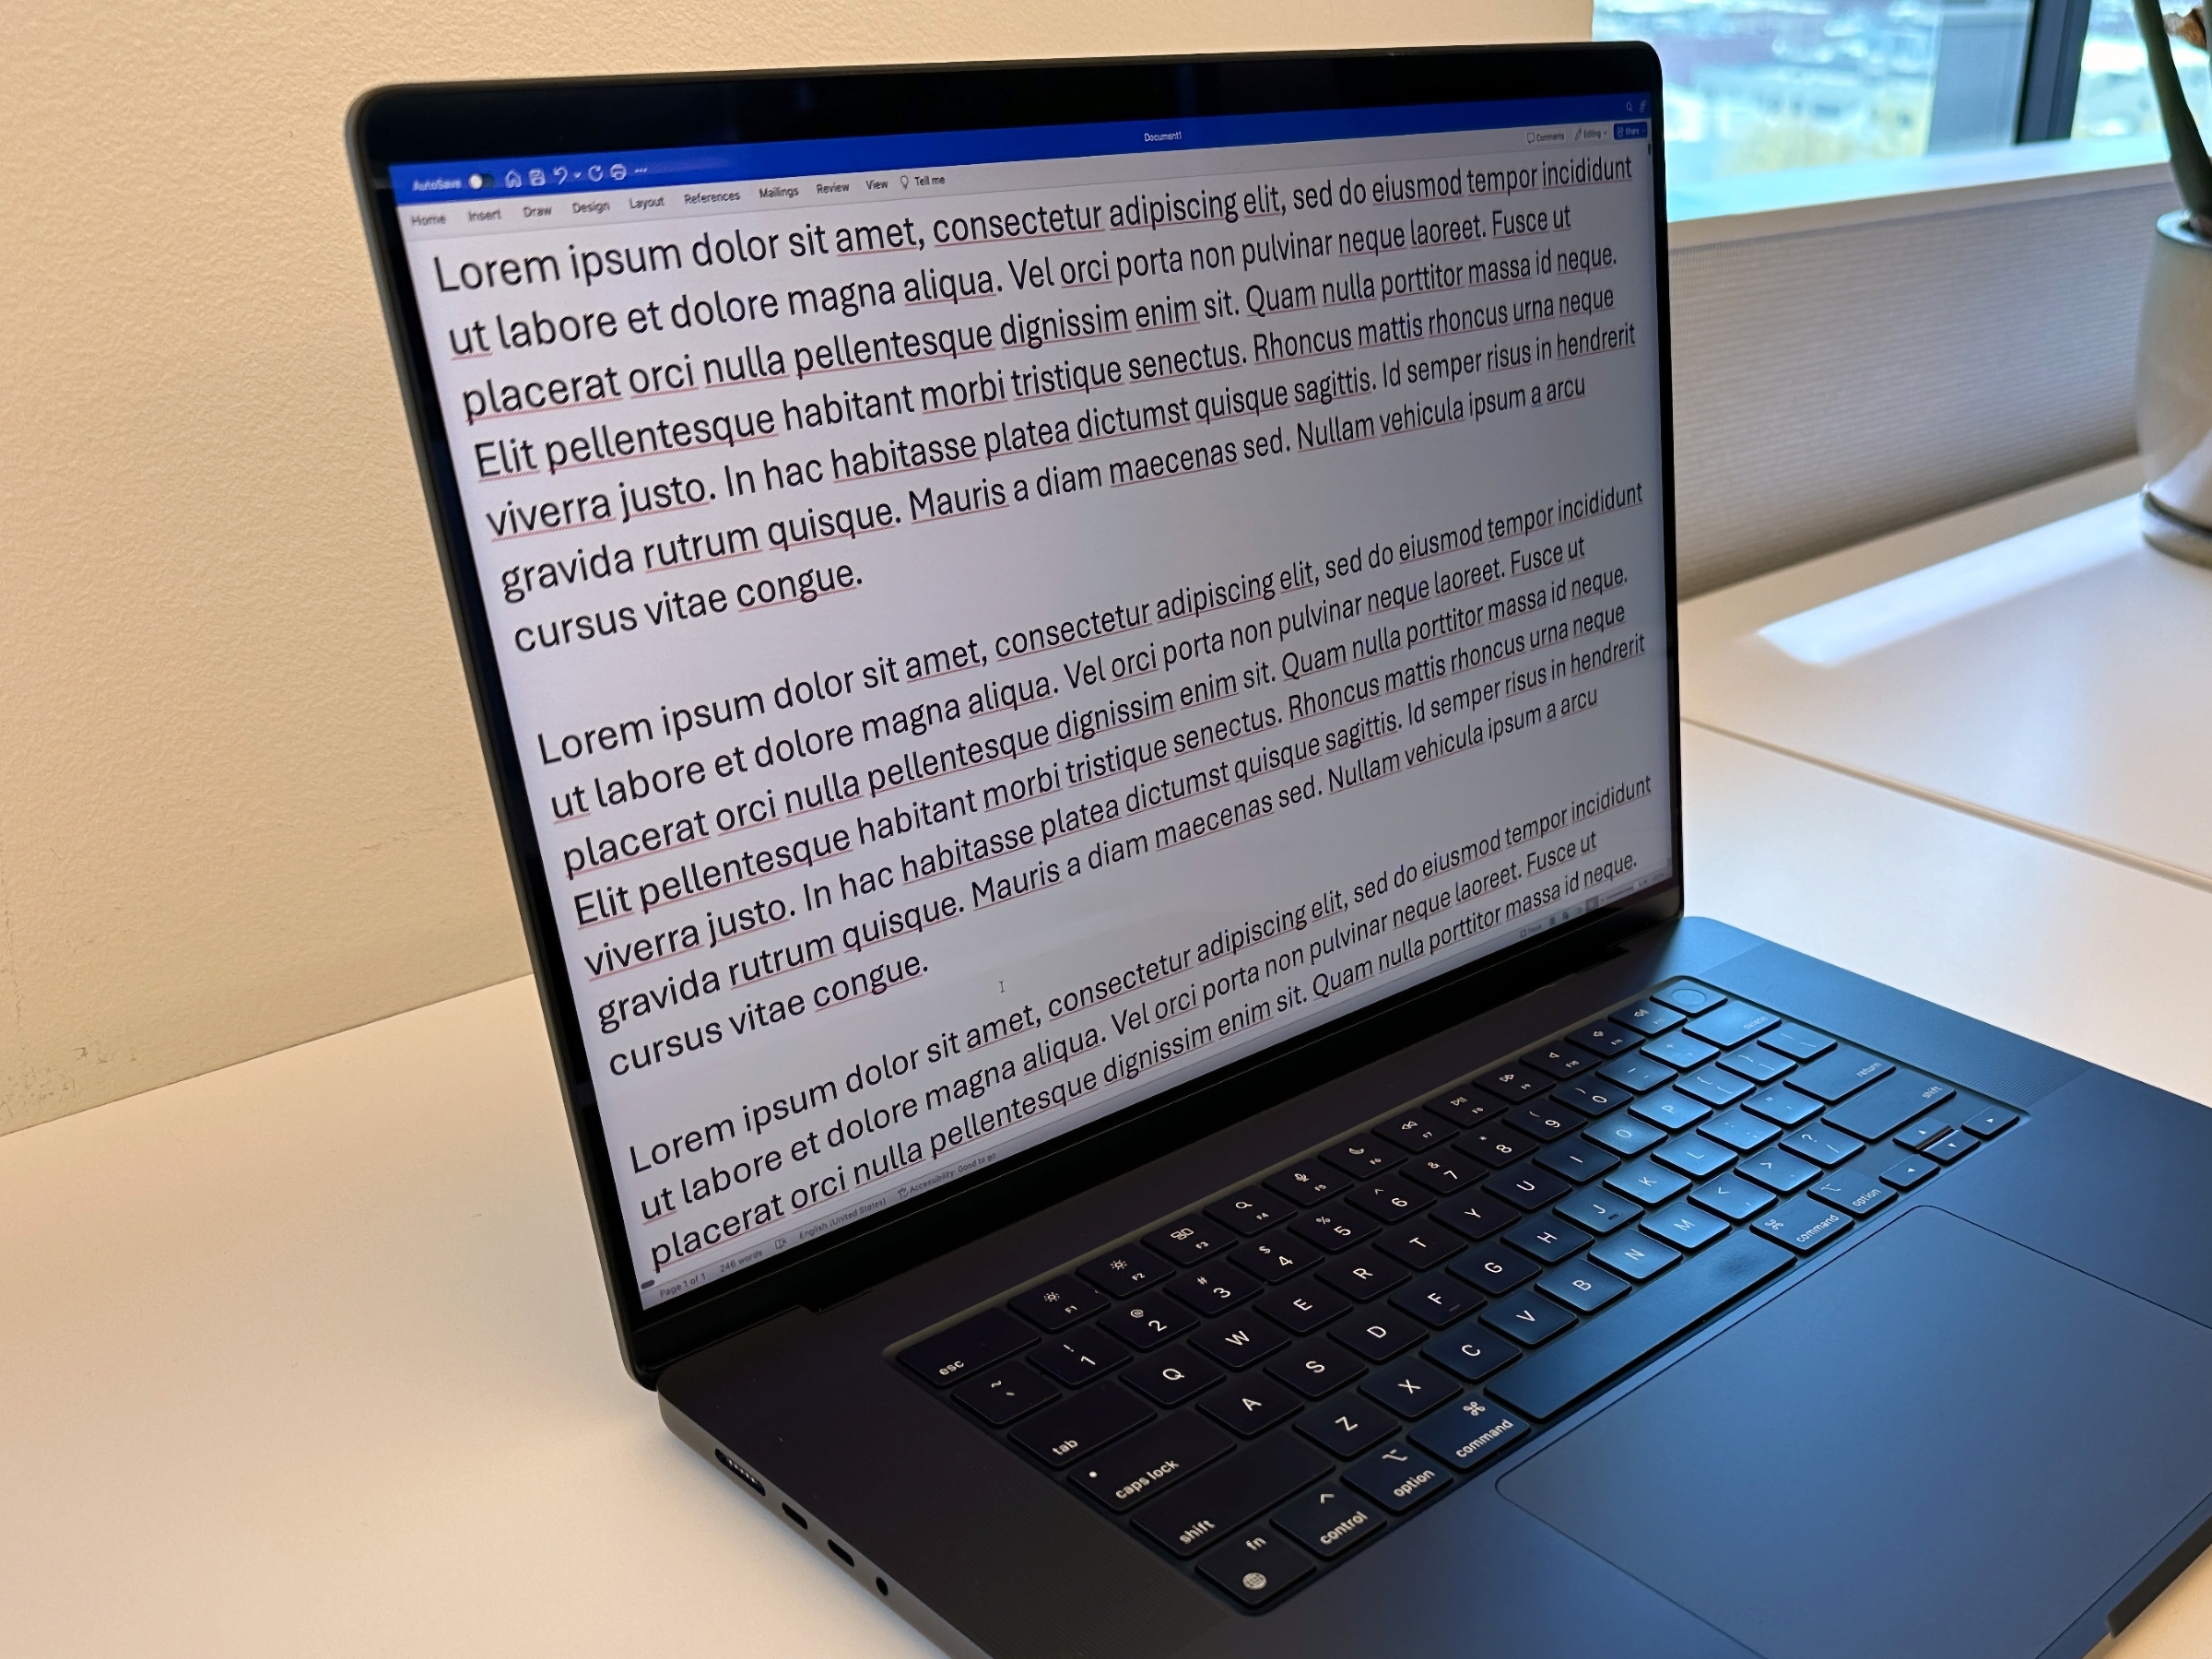 Text displayed on the left corner of the MacBook Pro